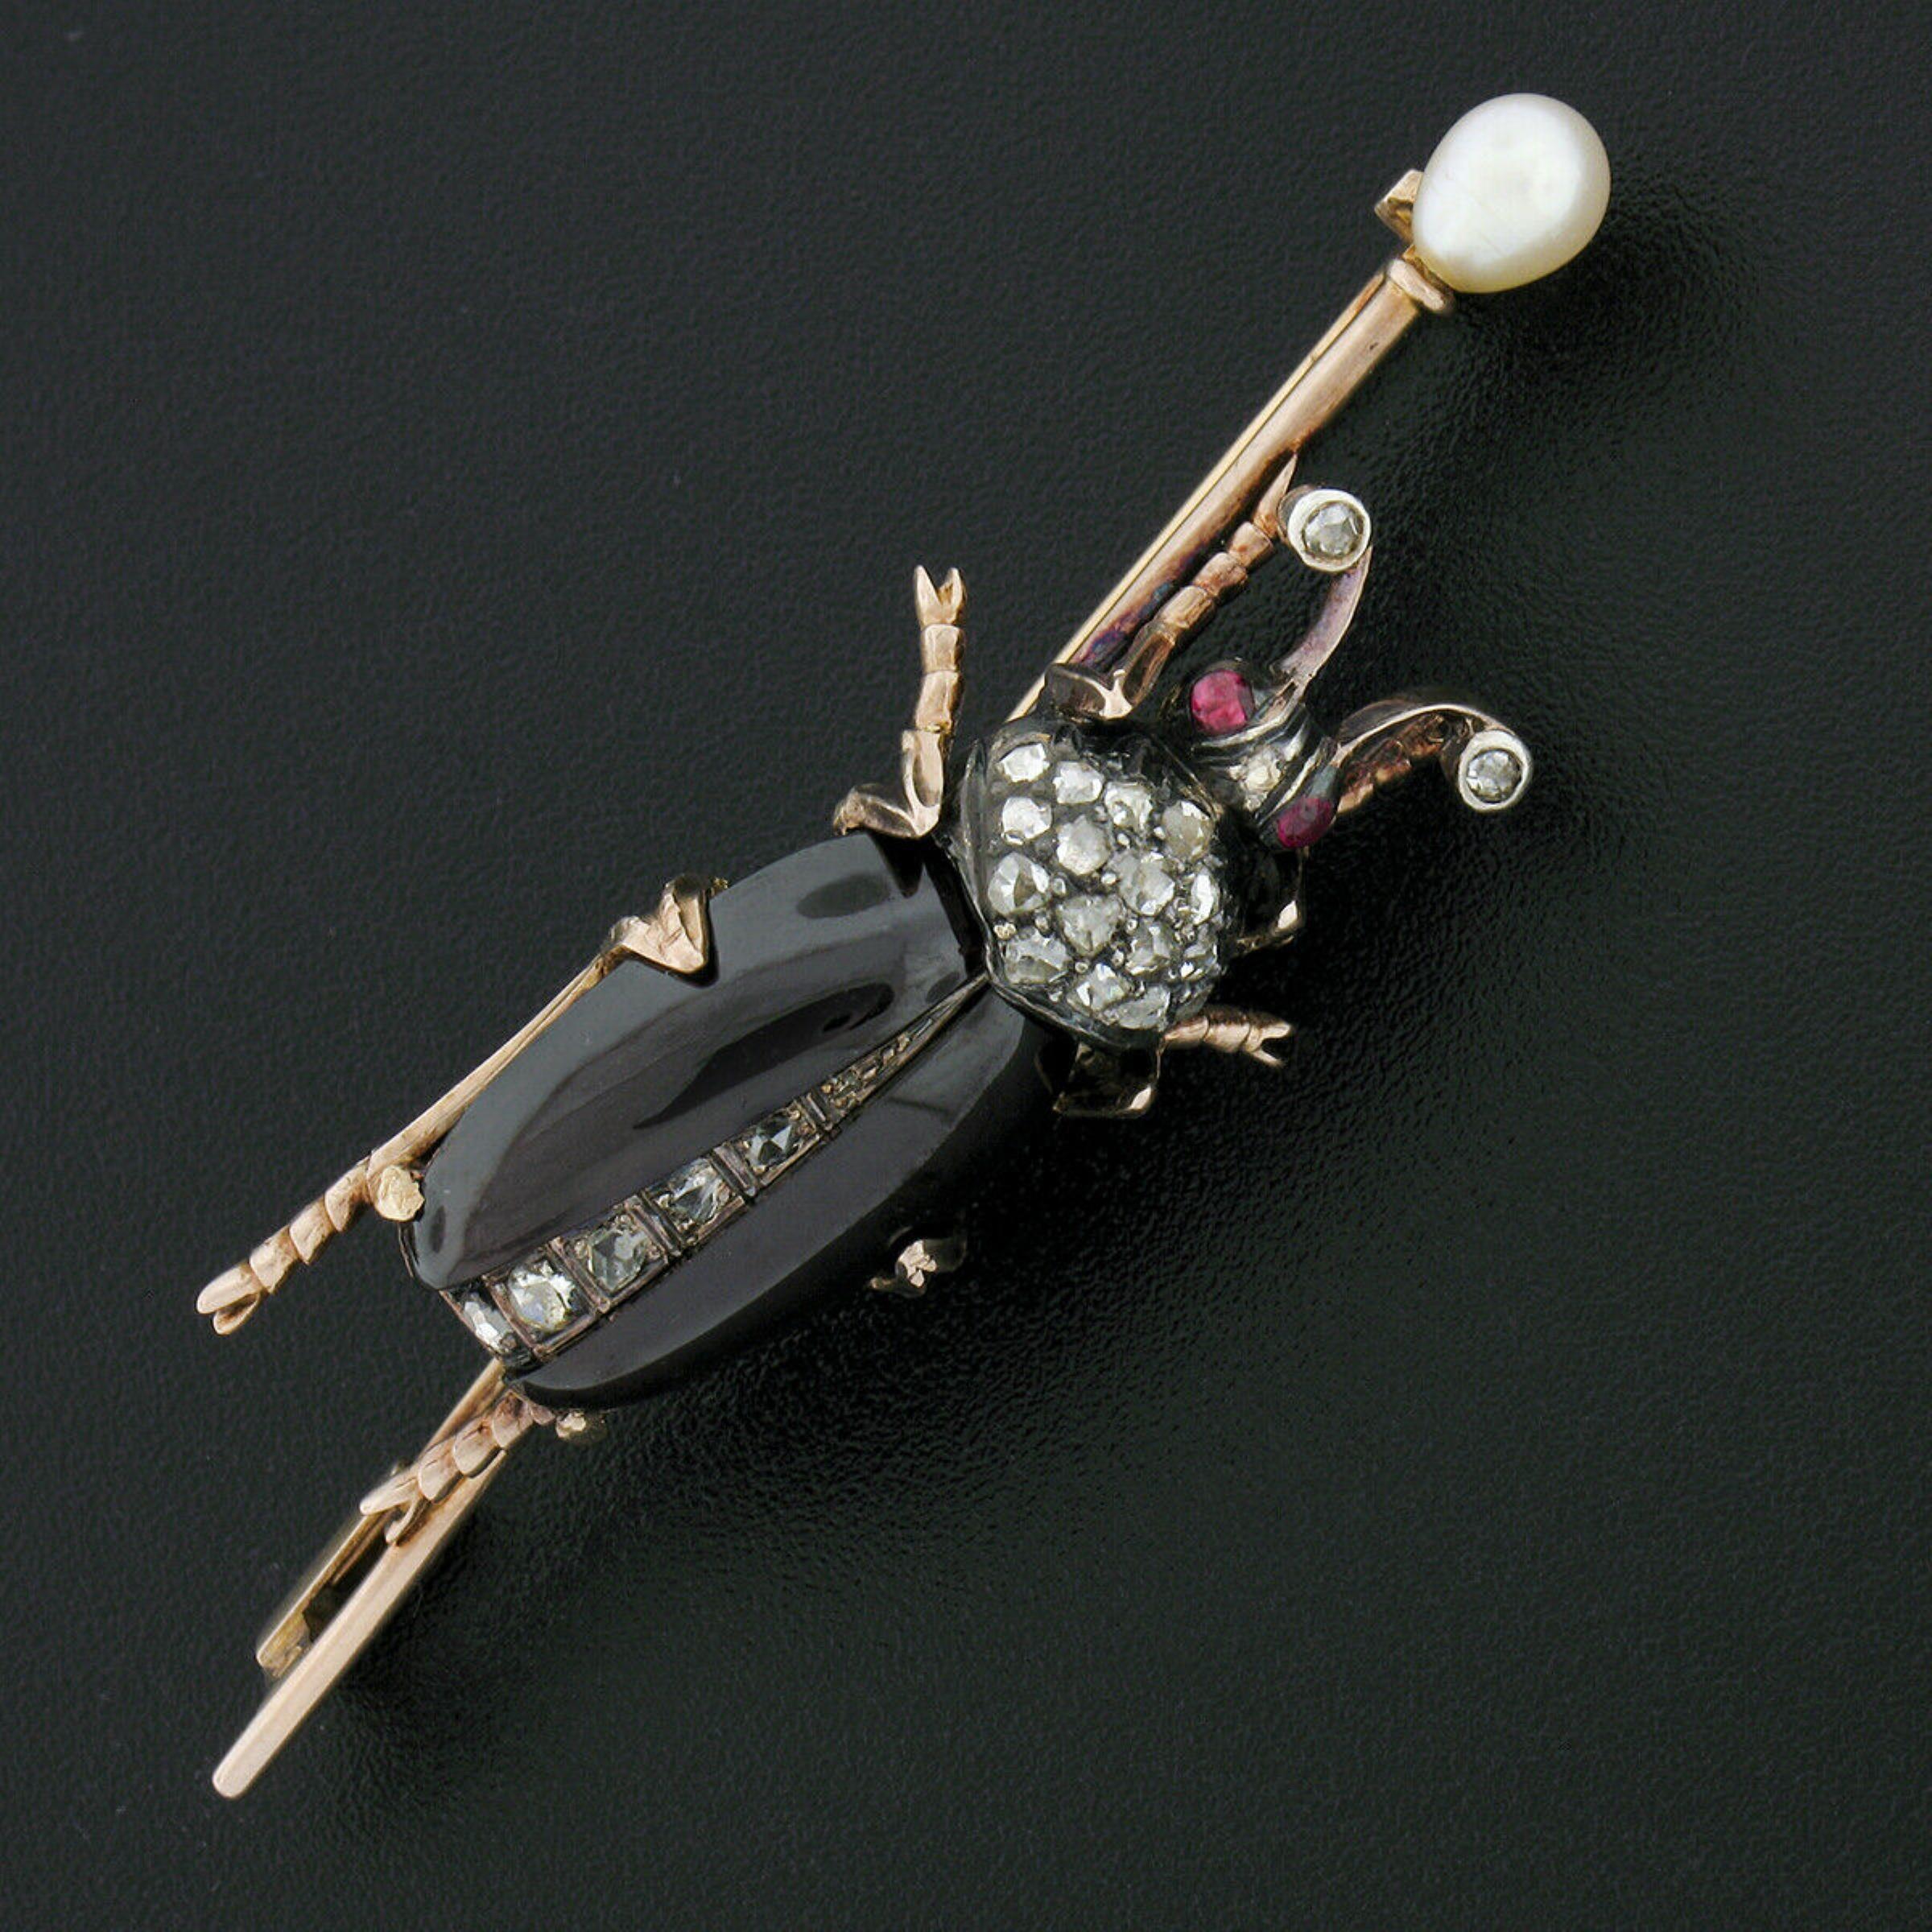 Here we have a very well made, antique, pin/brooch that was crafted in France from solid 18k gold and silver during the Victorian era. The brooch features a large beetle design that shows incredible detail and is neatly set with fine stones